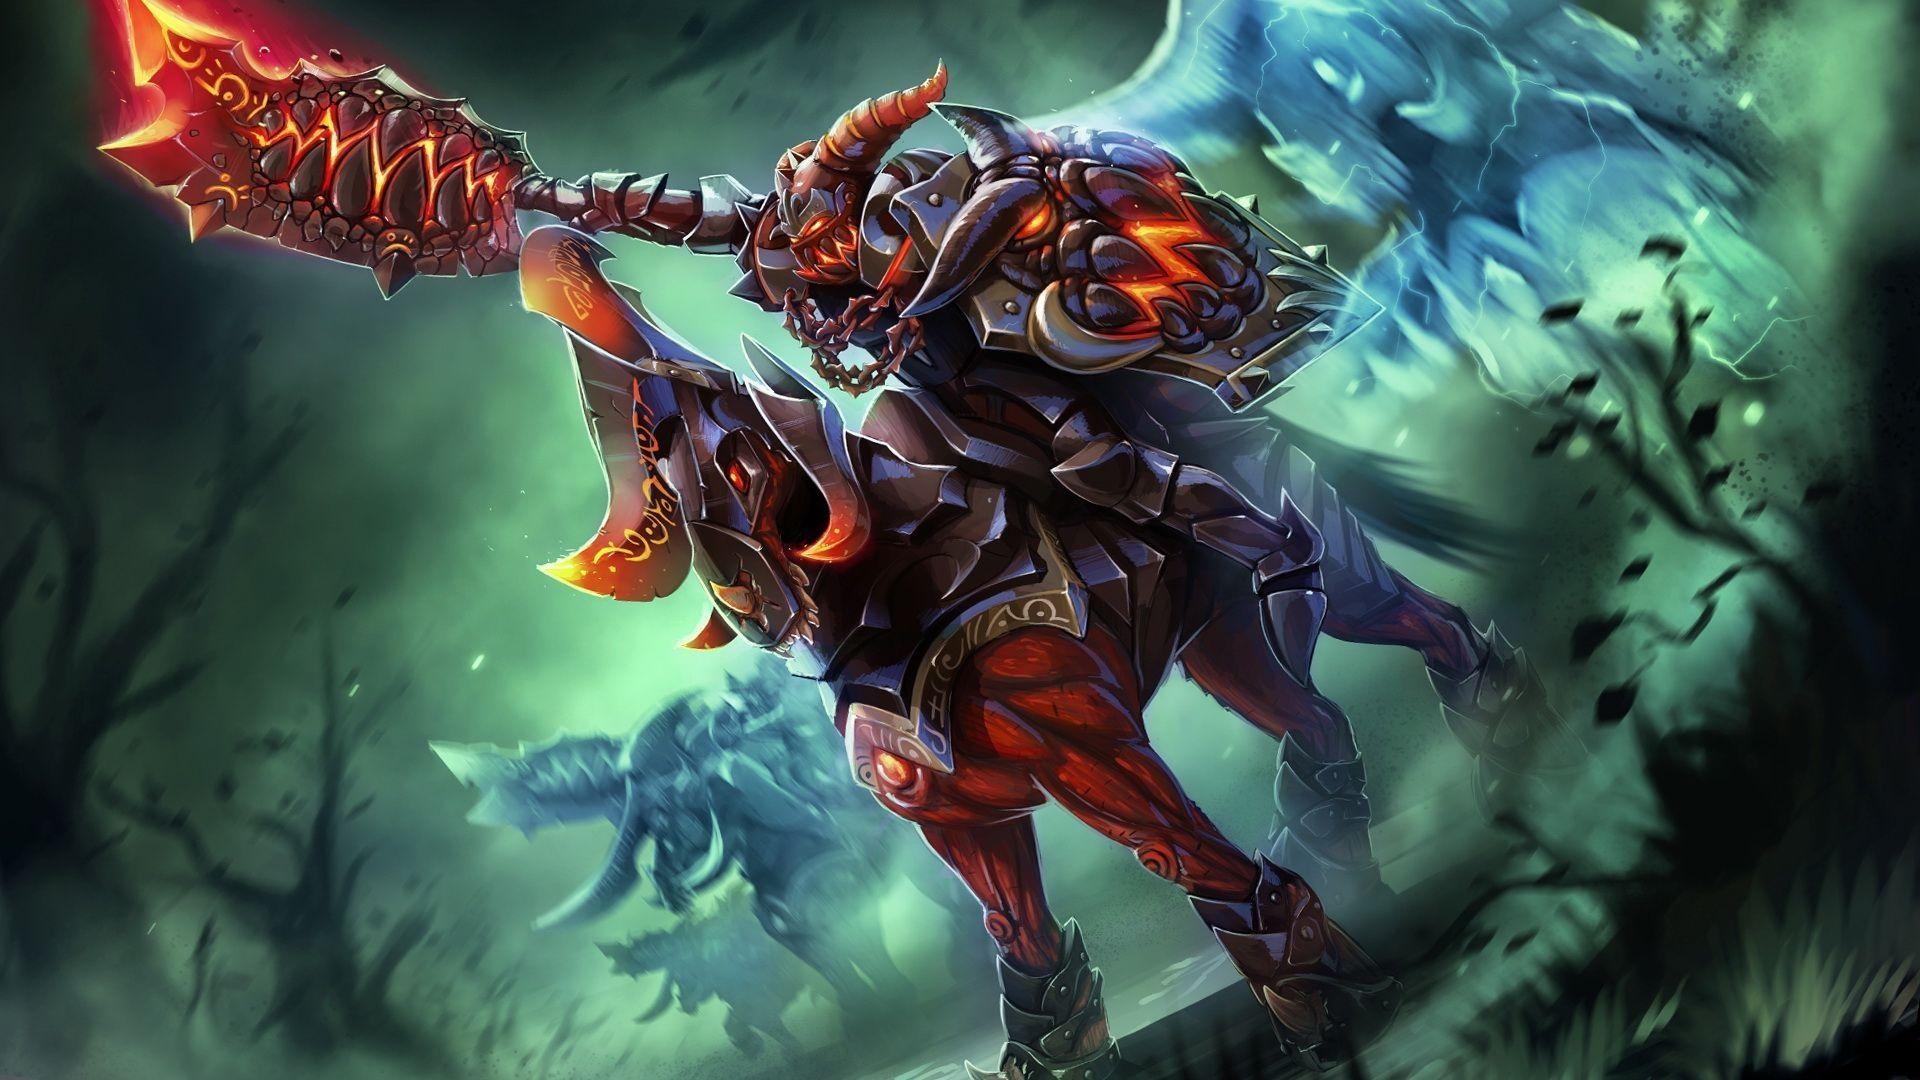 Dota 2 Chaos Knight Wallpaper High Definition Is Cool Wallpaper